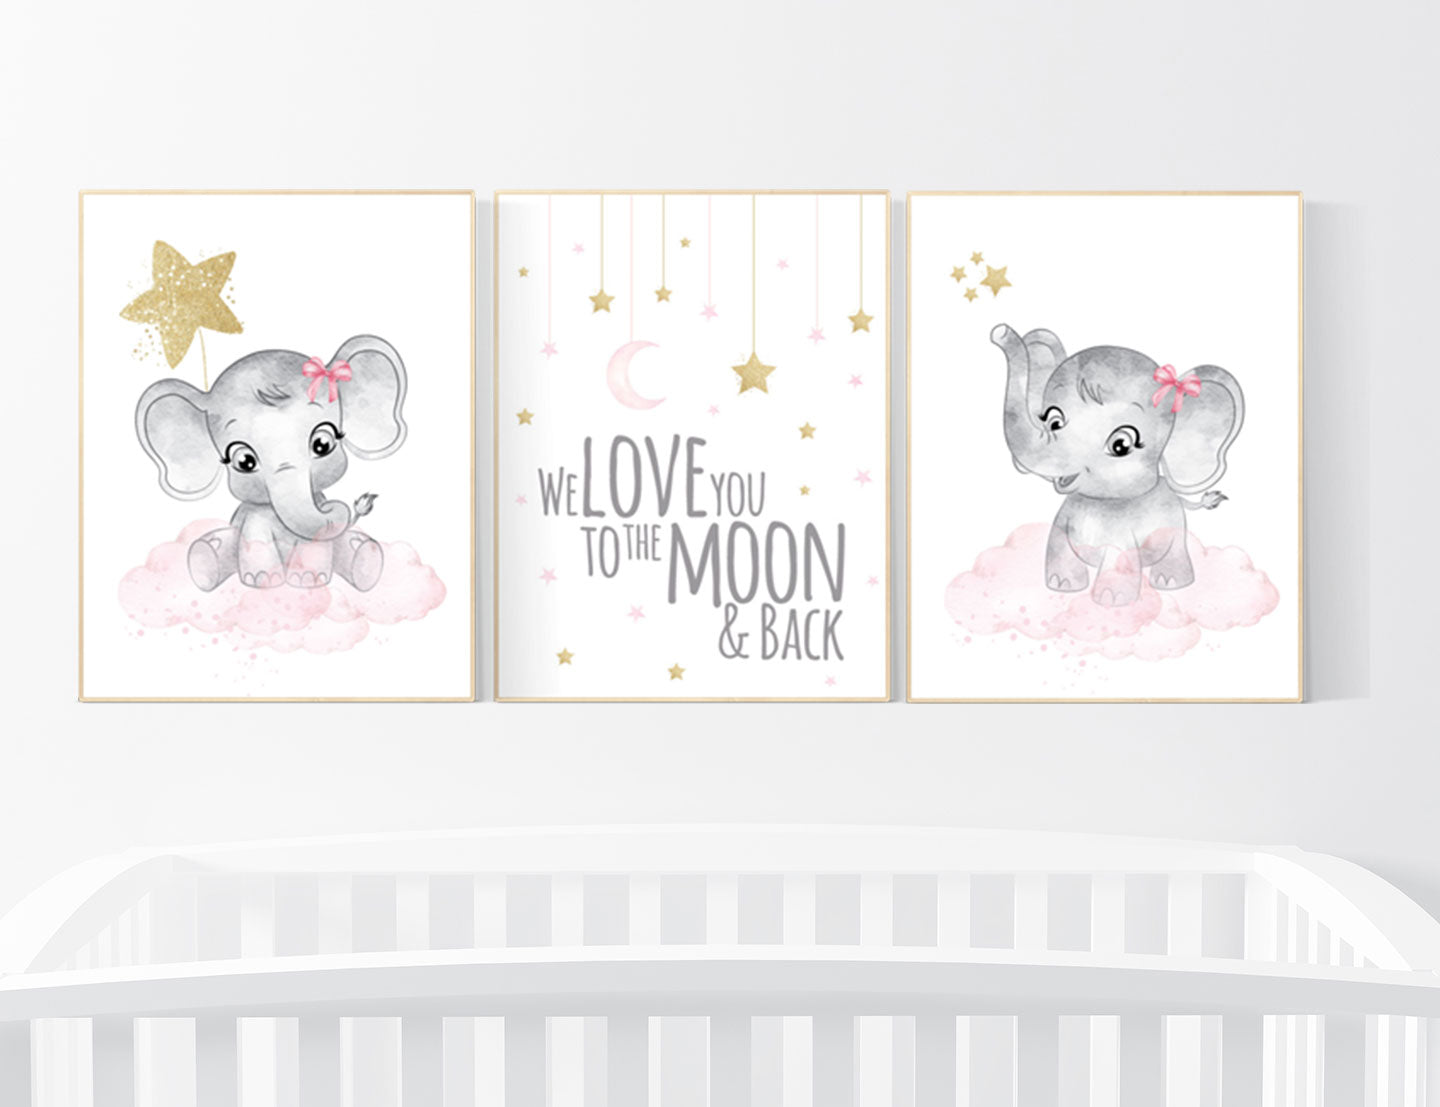 pink and gold nursery ideas